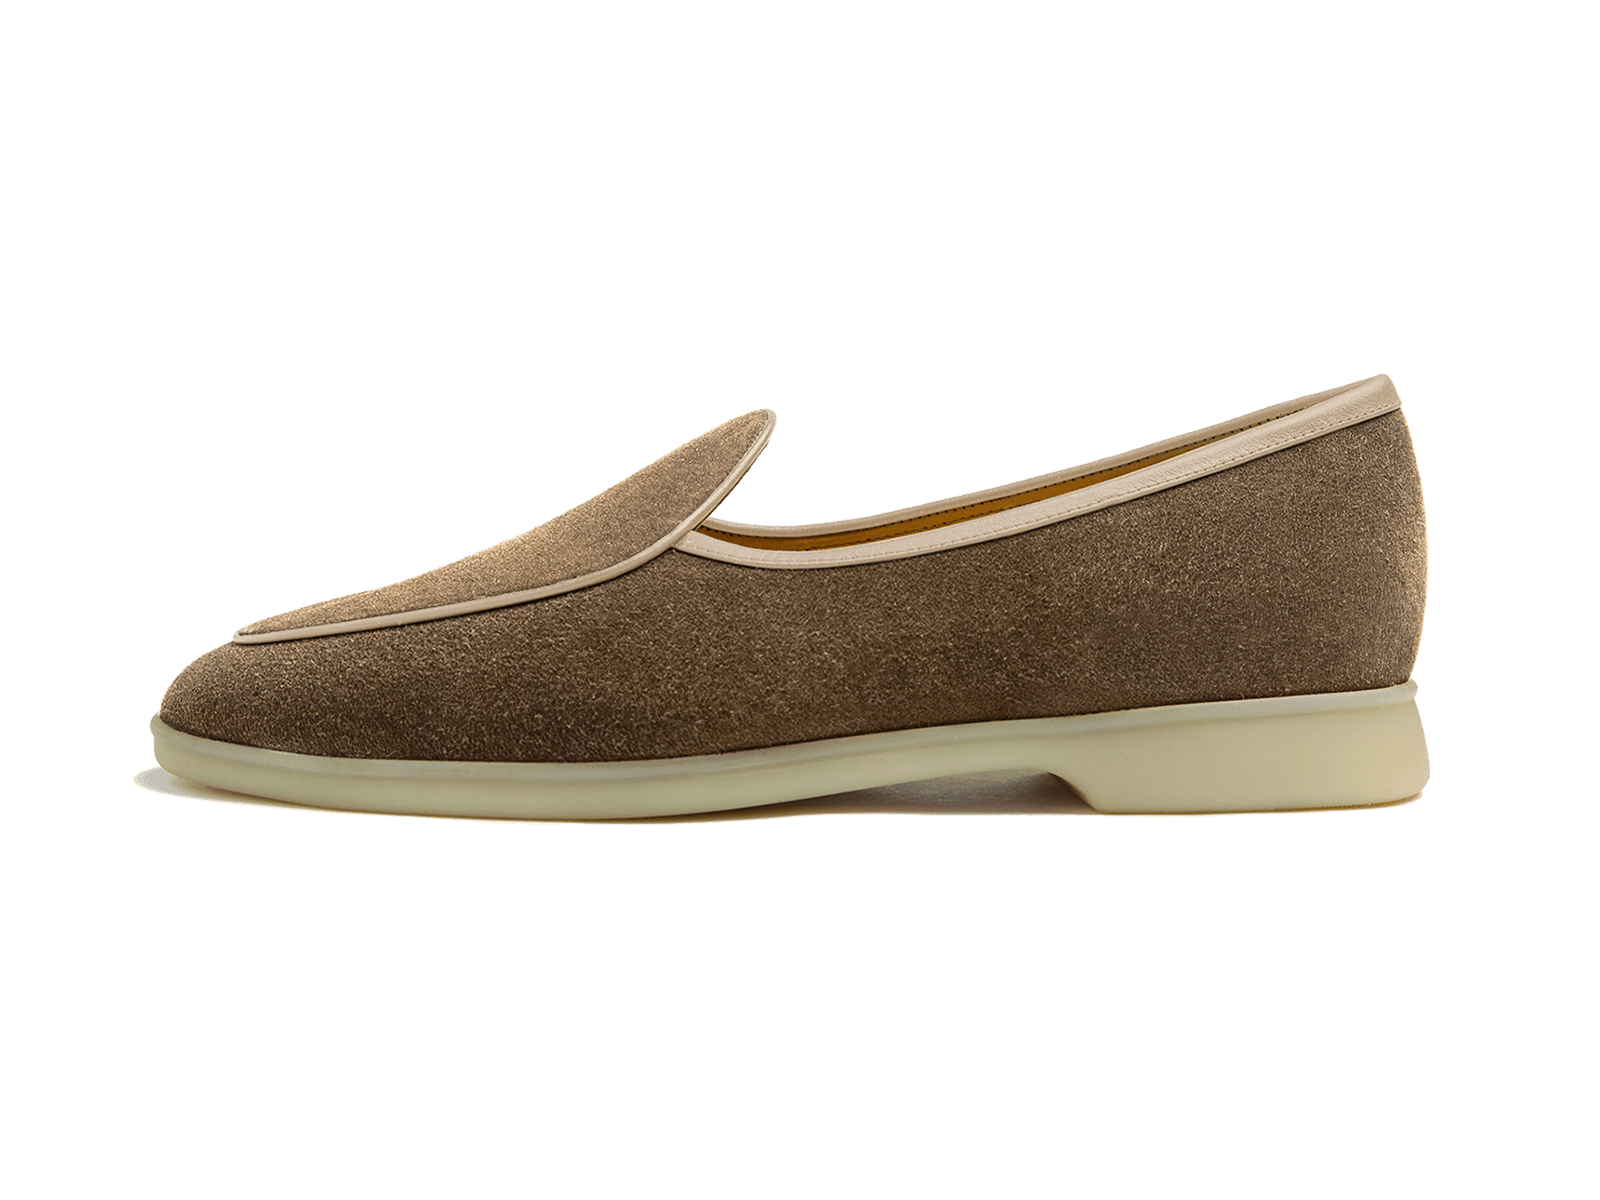 Stride Loafers in Greige Suede Natural Sole